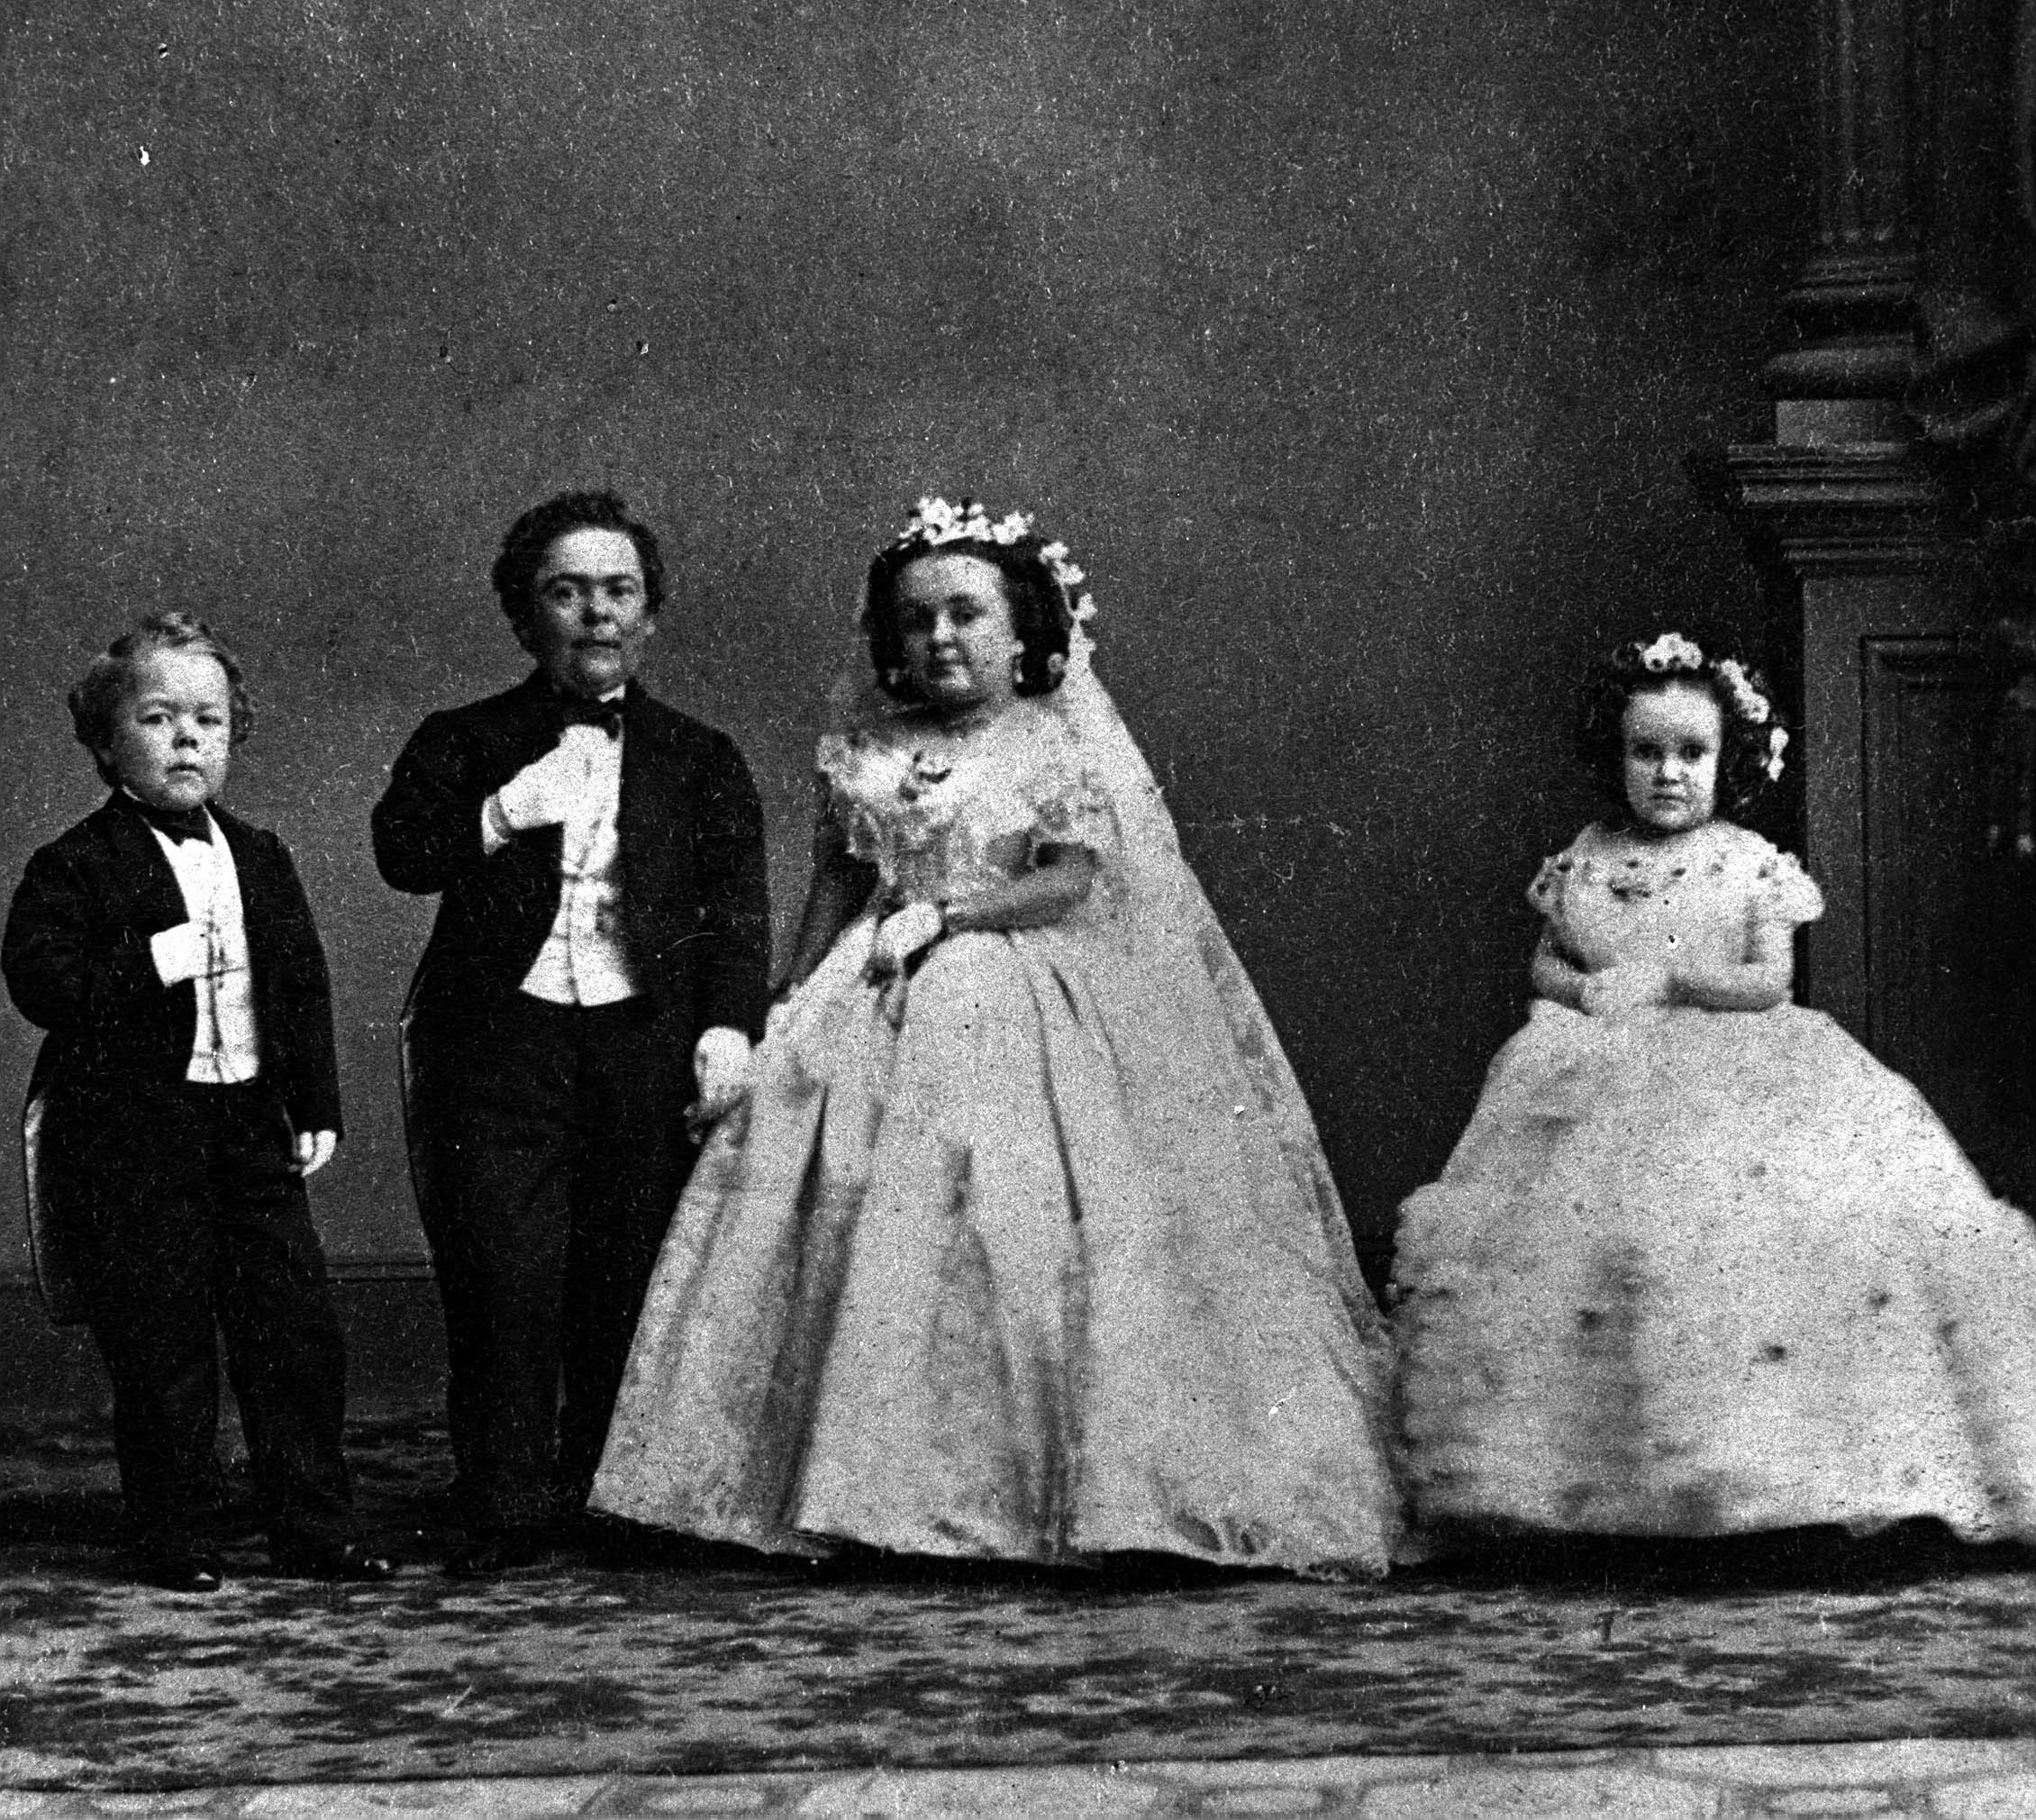 General Tom Thumb alias, Charles Sherwood Stratton, US midget showman,and his wife in 1869.